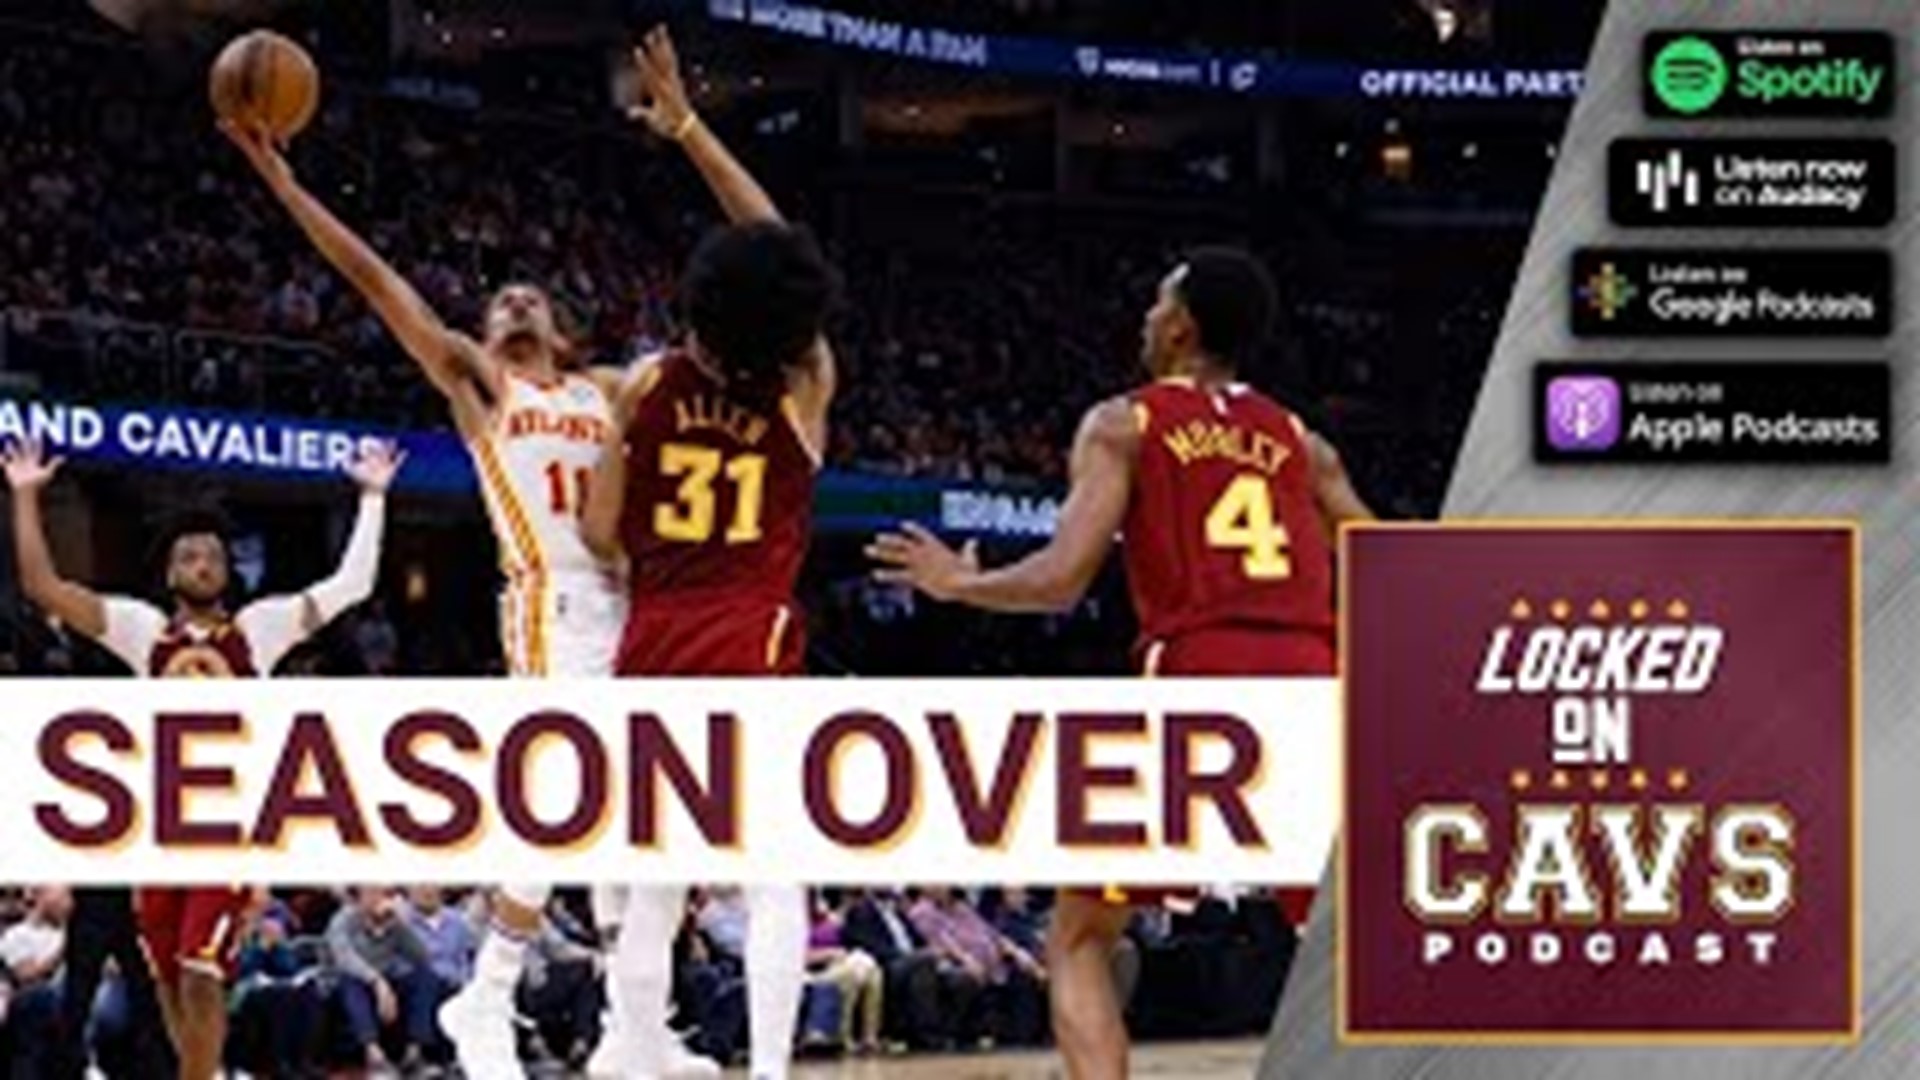 The Cavs' lost to the Hawks to end their season. We discuss Trae Young's monster second half, Jarrett Allen's return, coaching mistakes and more.